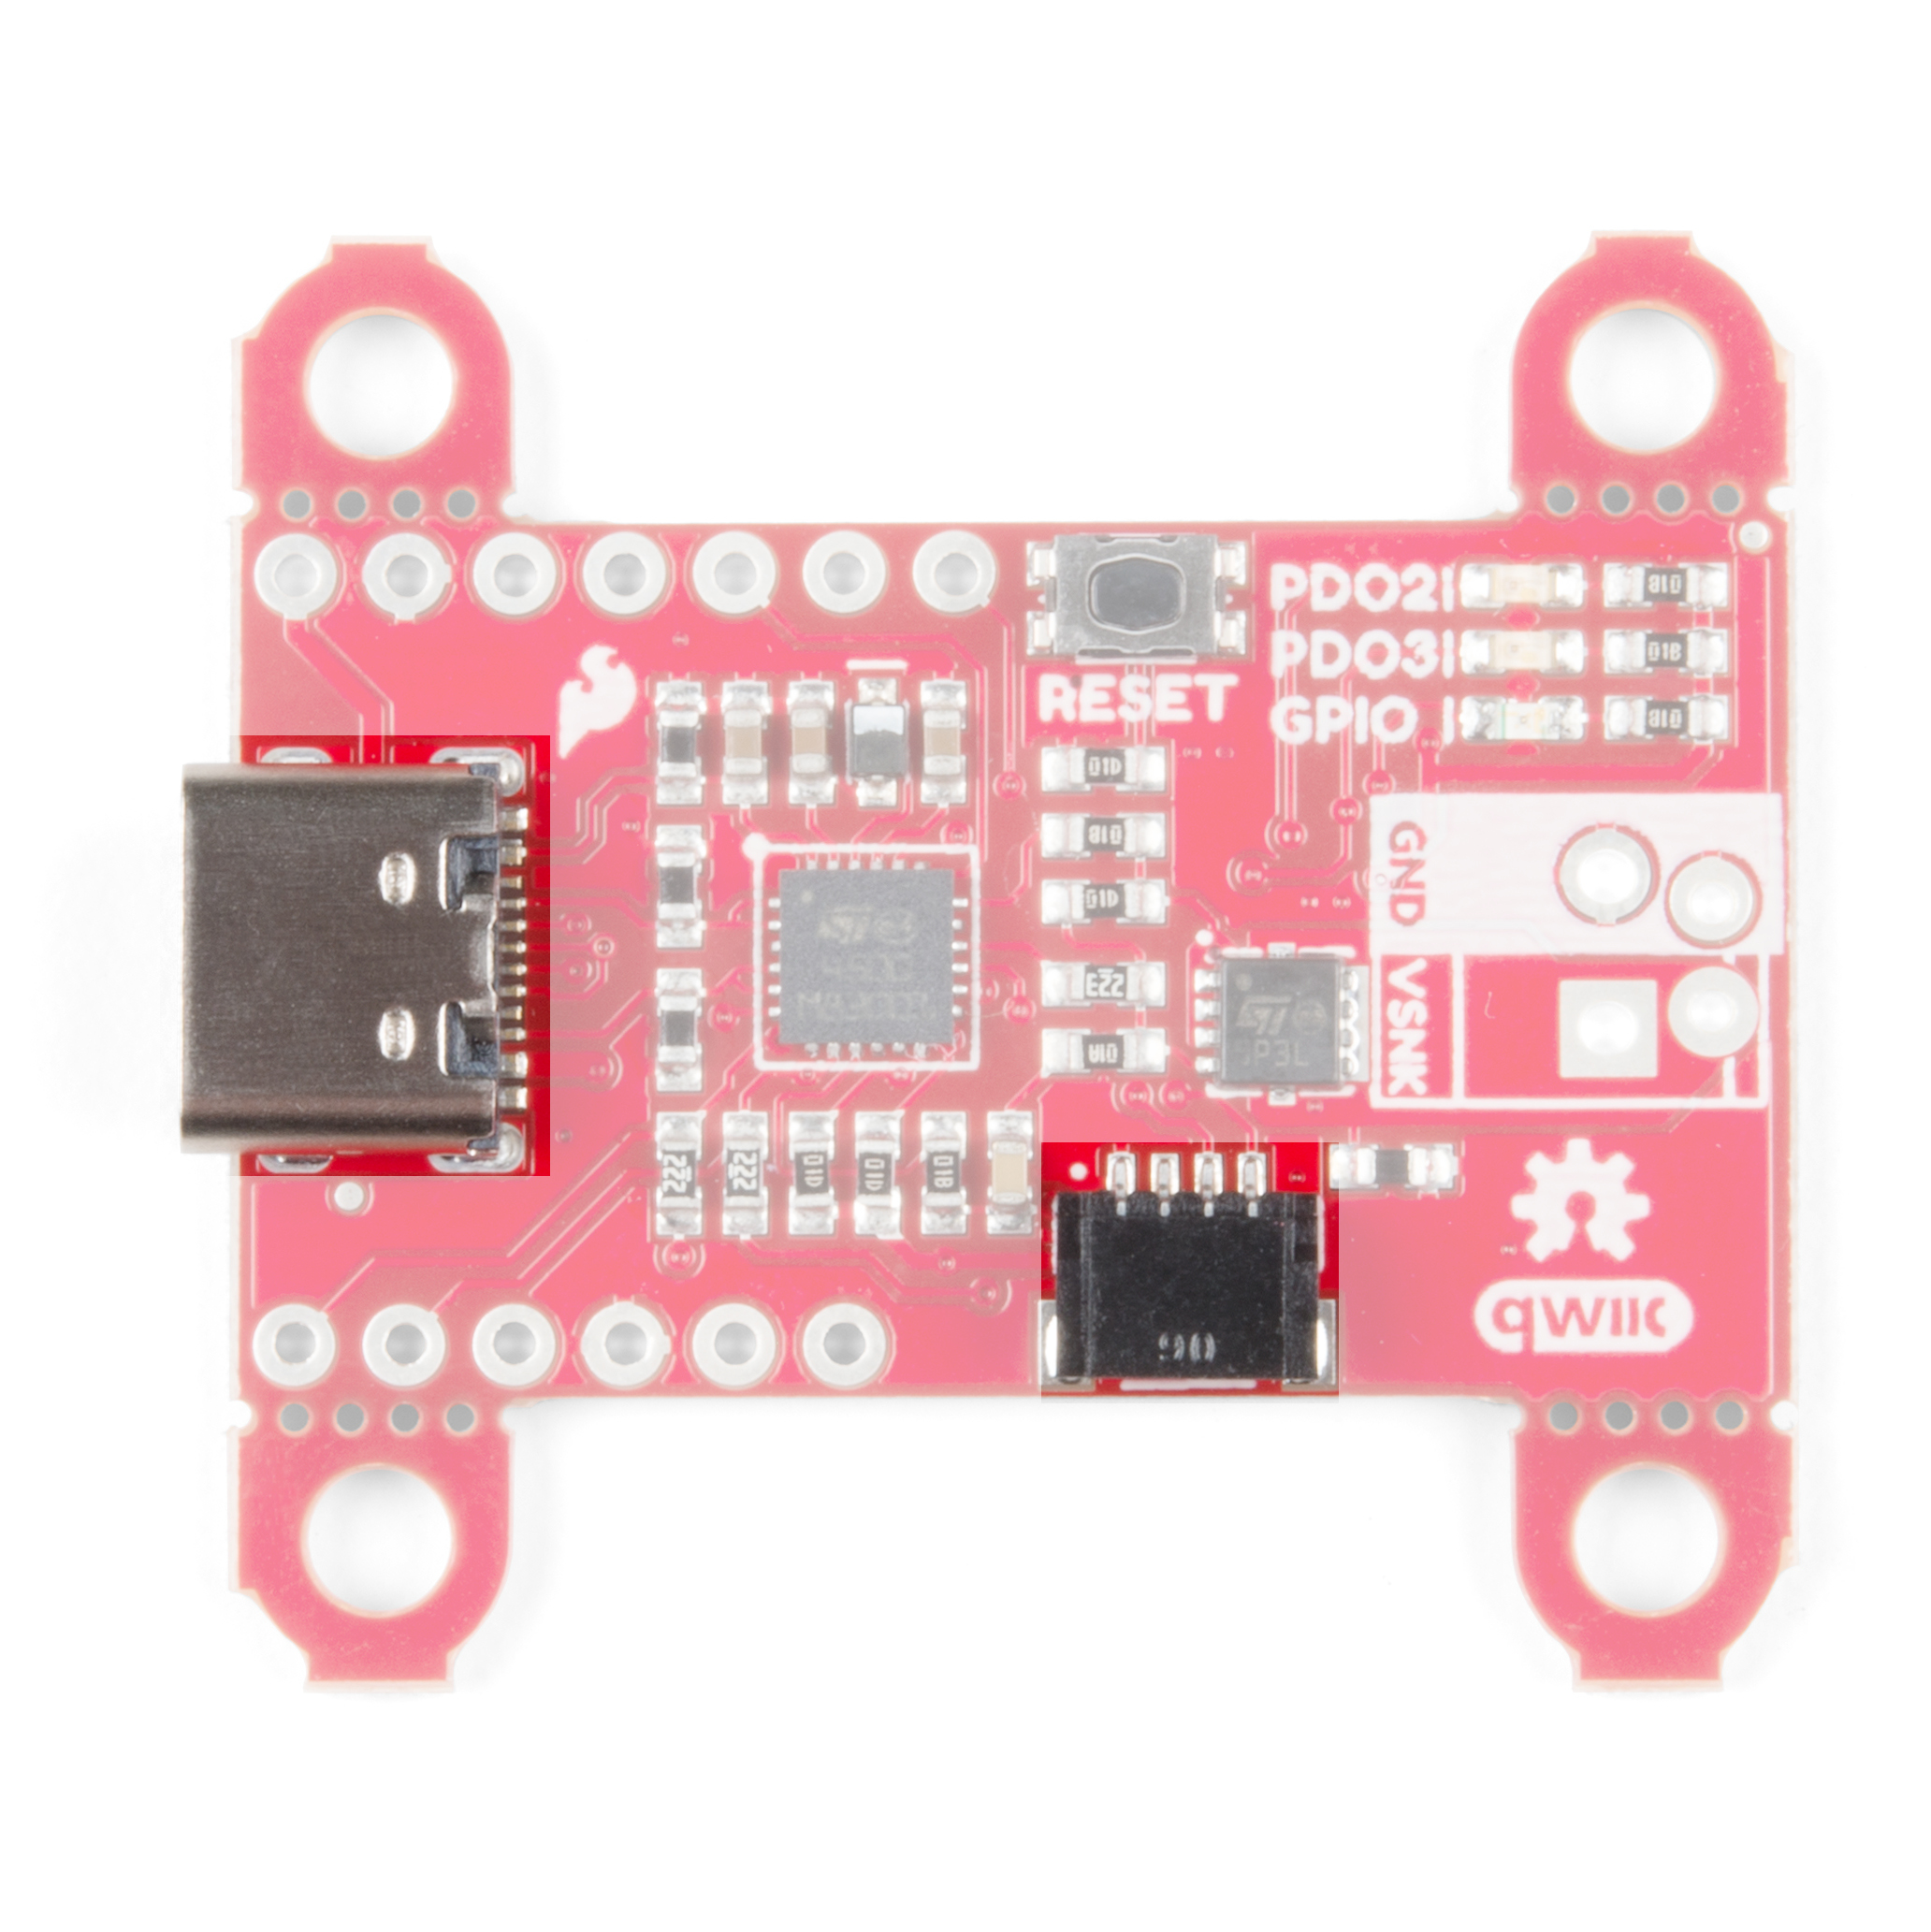 Land med statsborgerskab Intrusion buffet Power Delivery Board - USB-C (Qwiic) Hookup Guide - SparkFun Learn